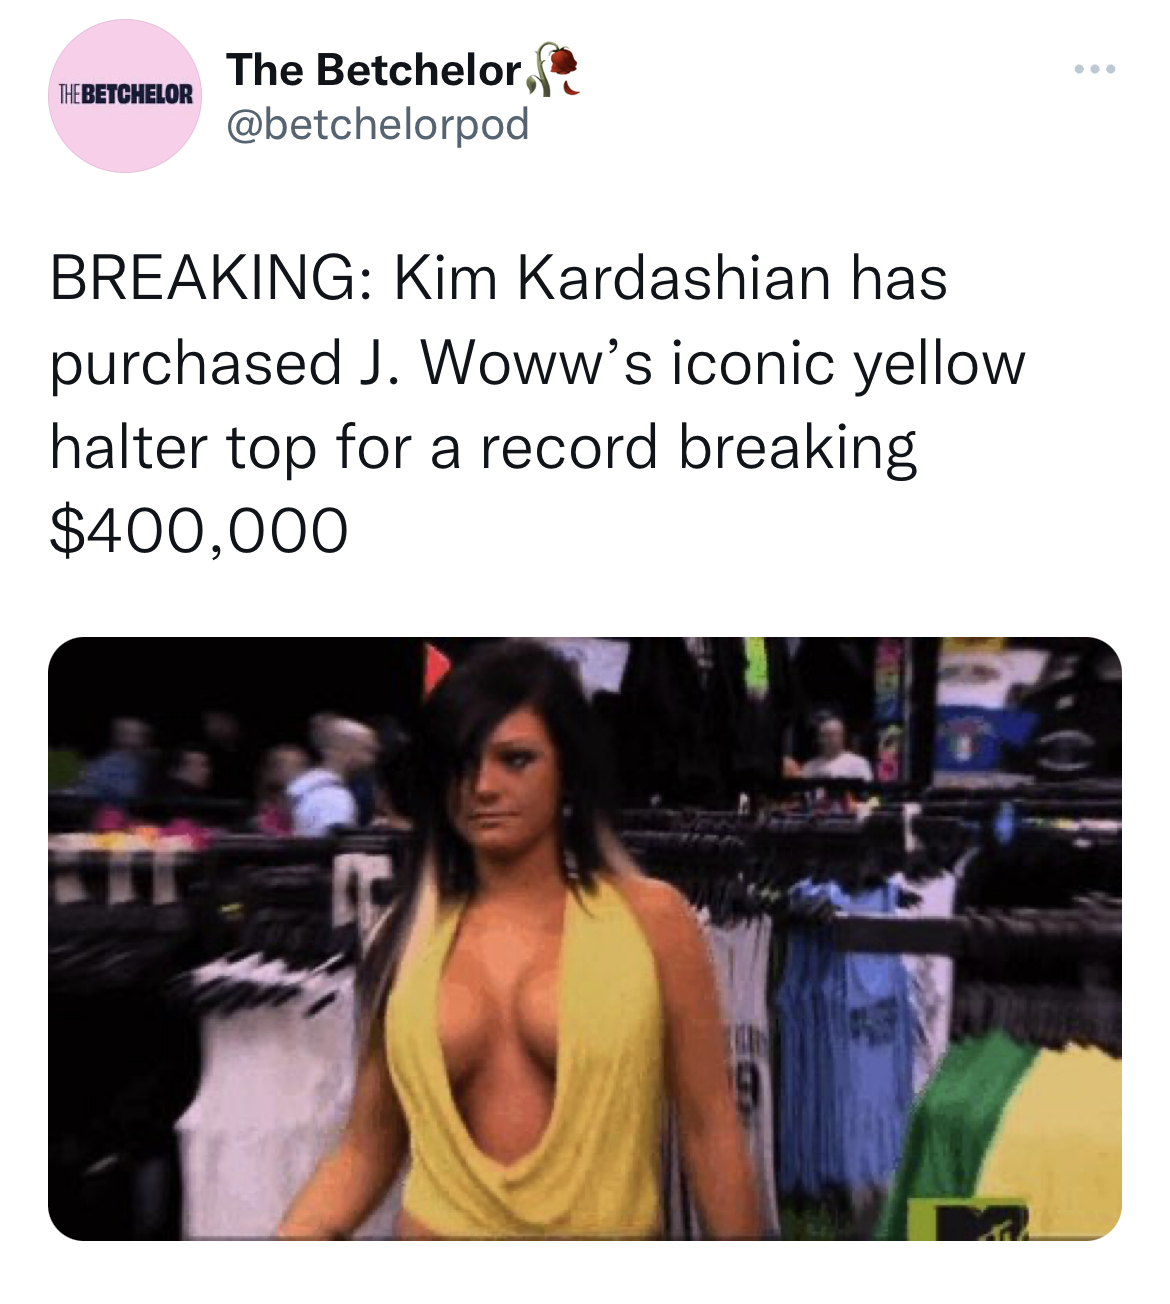 Tweets Dunking on Celebs - shoulder - The Betchelor The Betchelor, Breaking Kim Kardashian has purchased J. Woww's iconic yellow halter top for a record breaking $400,000